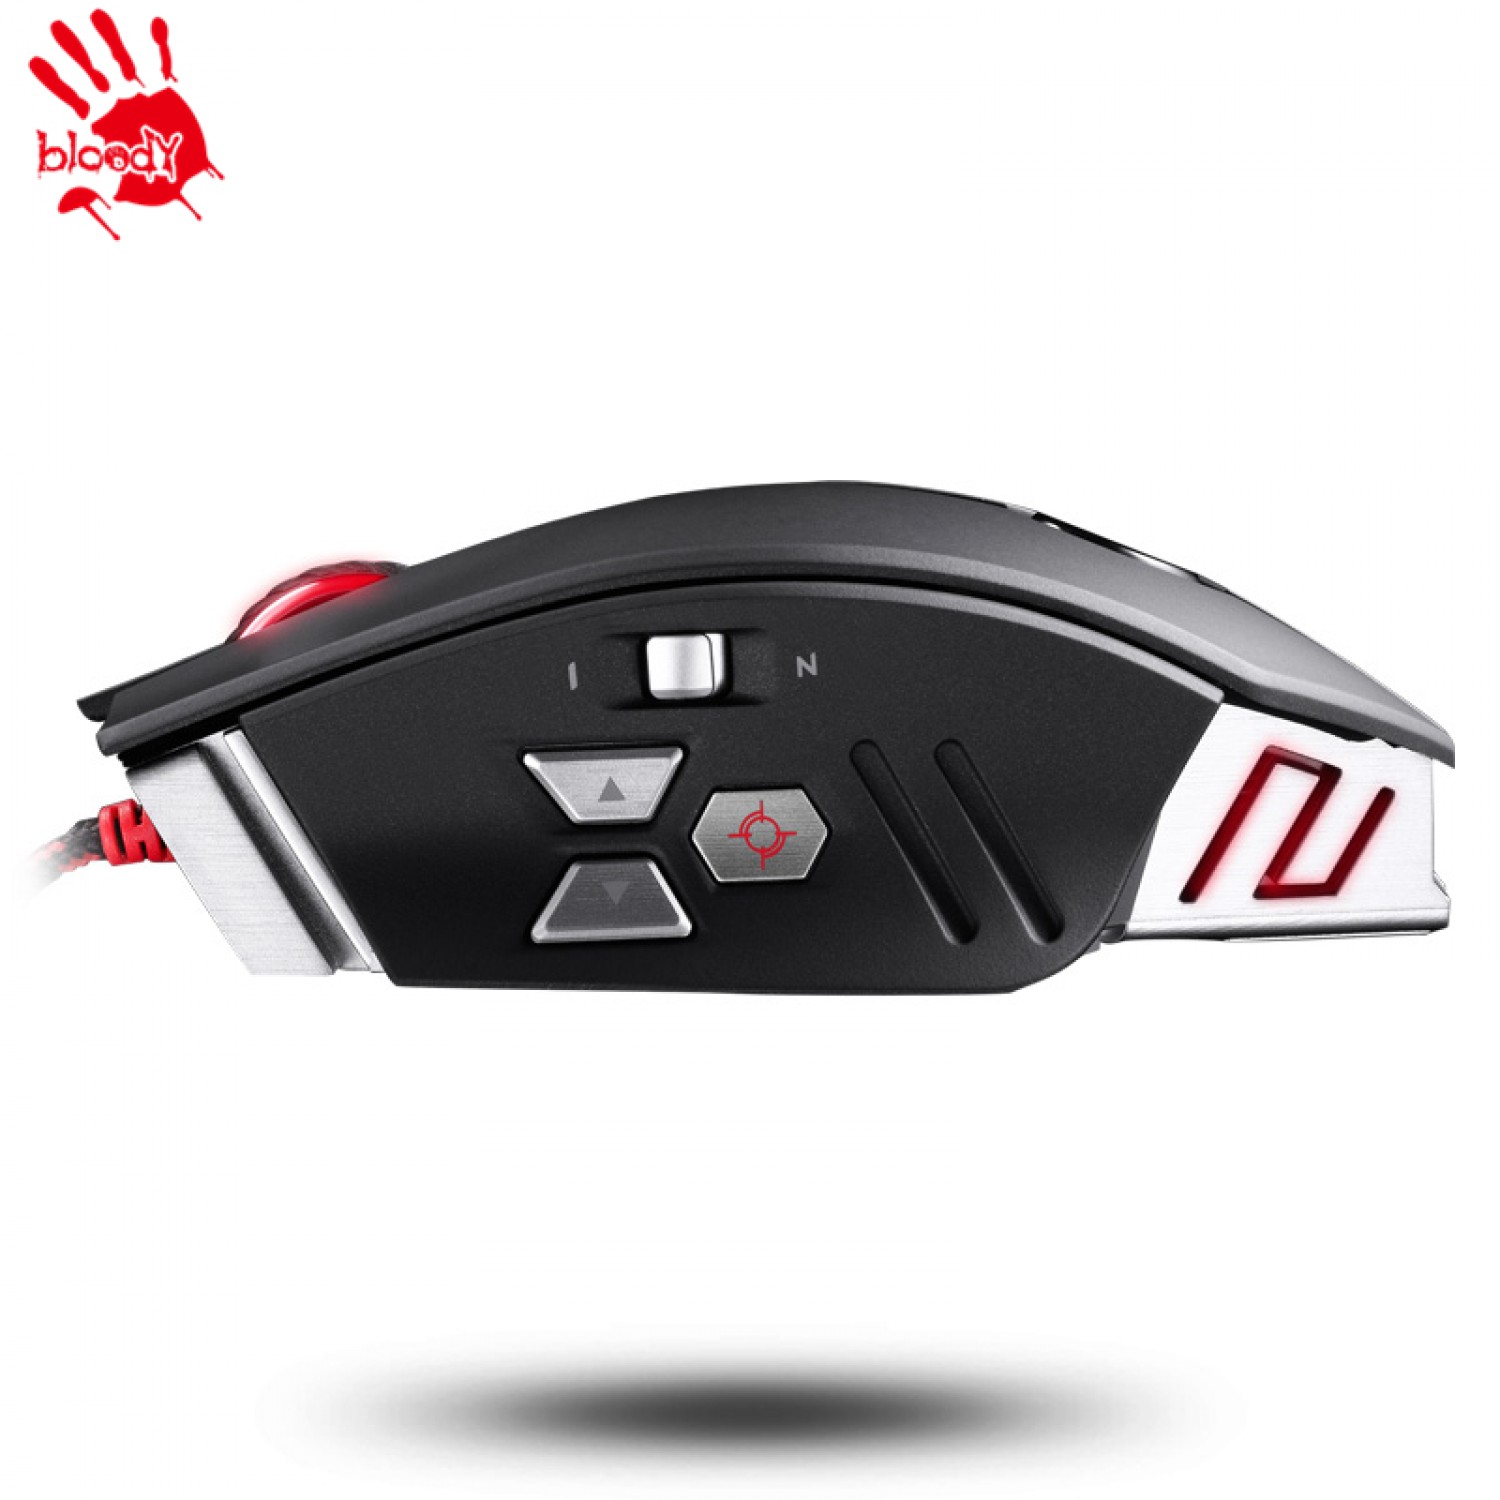  A4tech Bloody Zl50 Gaming Mouse-3